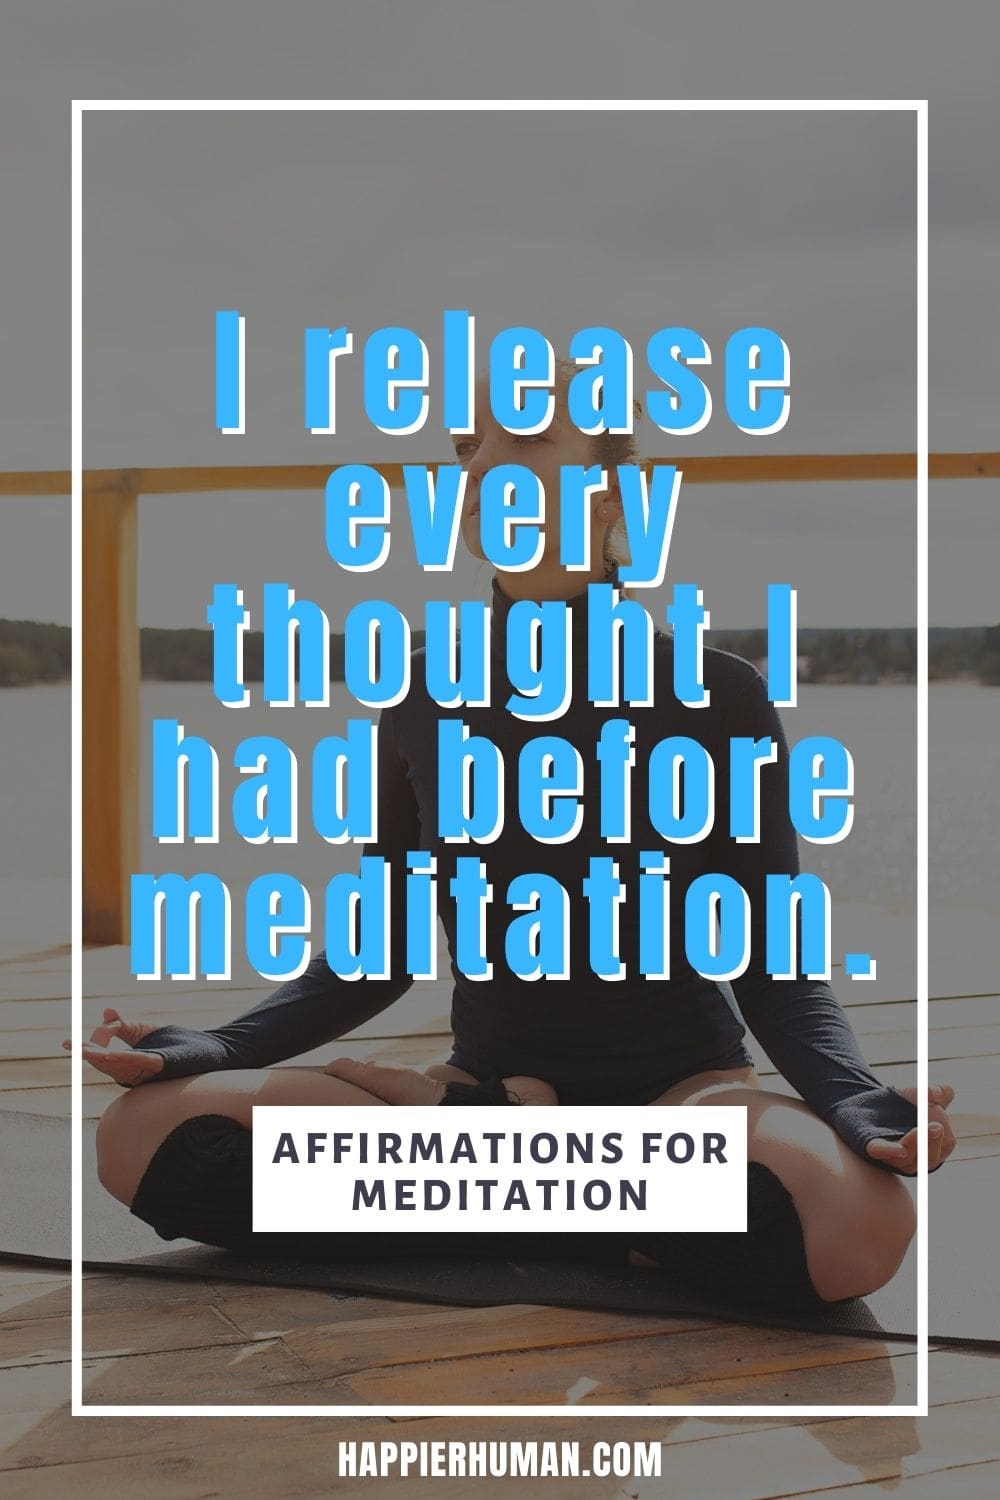 Affirmations for Meditation - I release every thought I had before meditation. | affirmations for meditation practice | positive affirmations for meditation | morning affirmations for meditation #anxiety #stress #relief